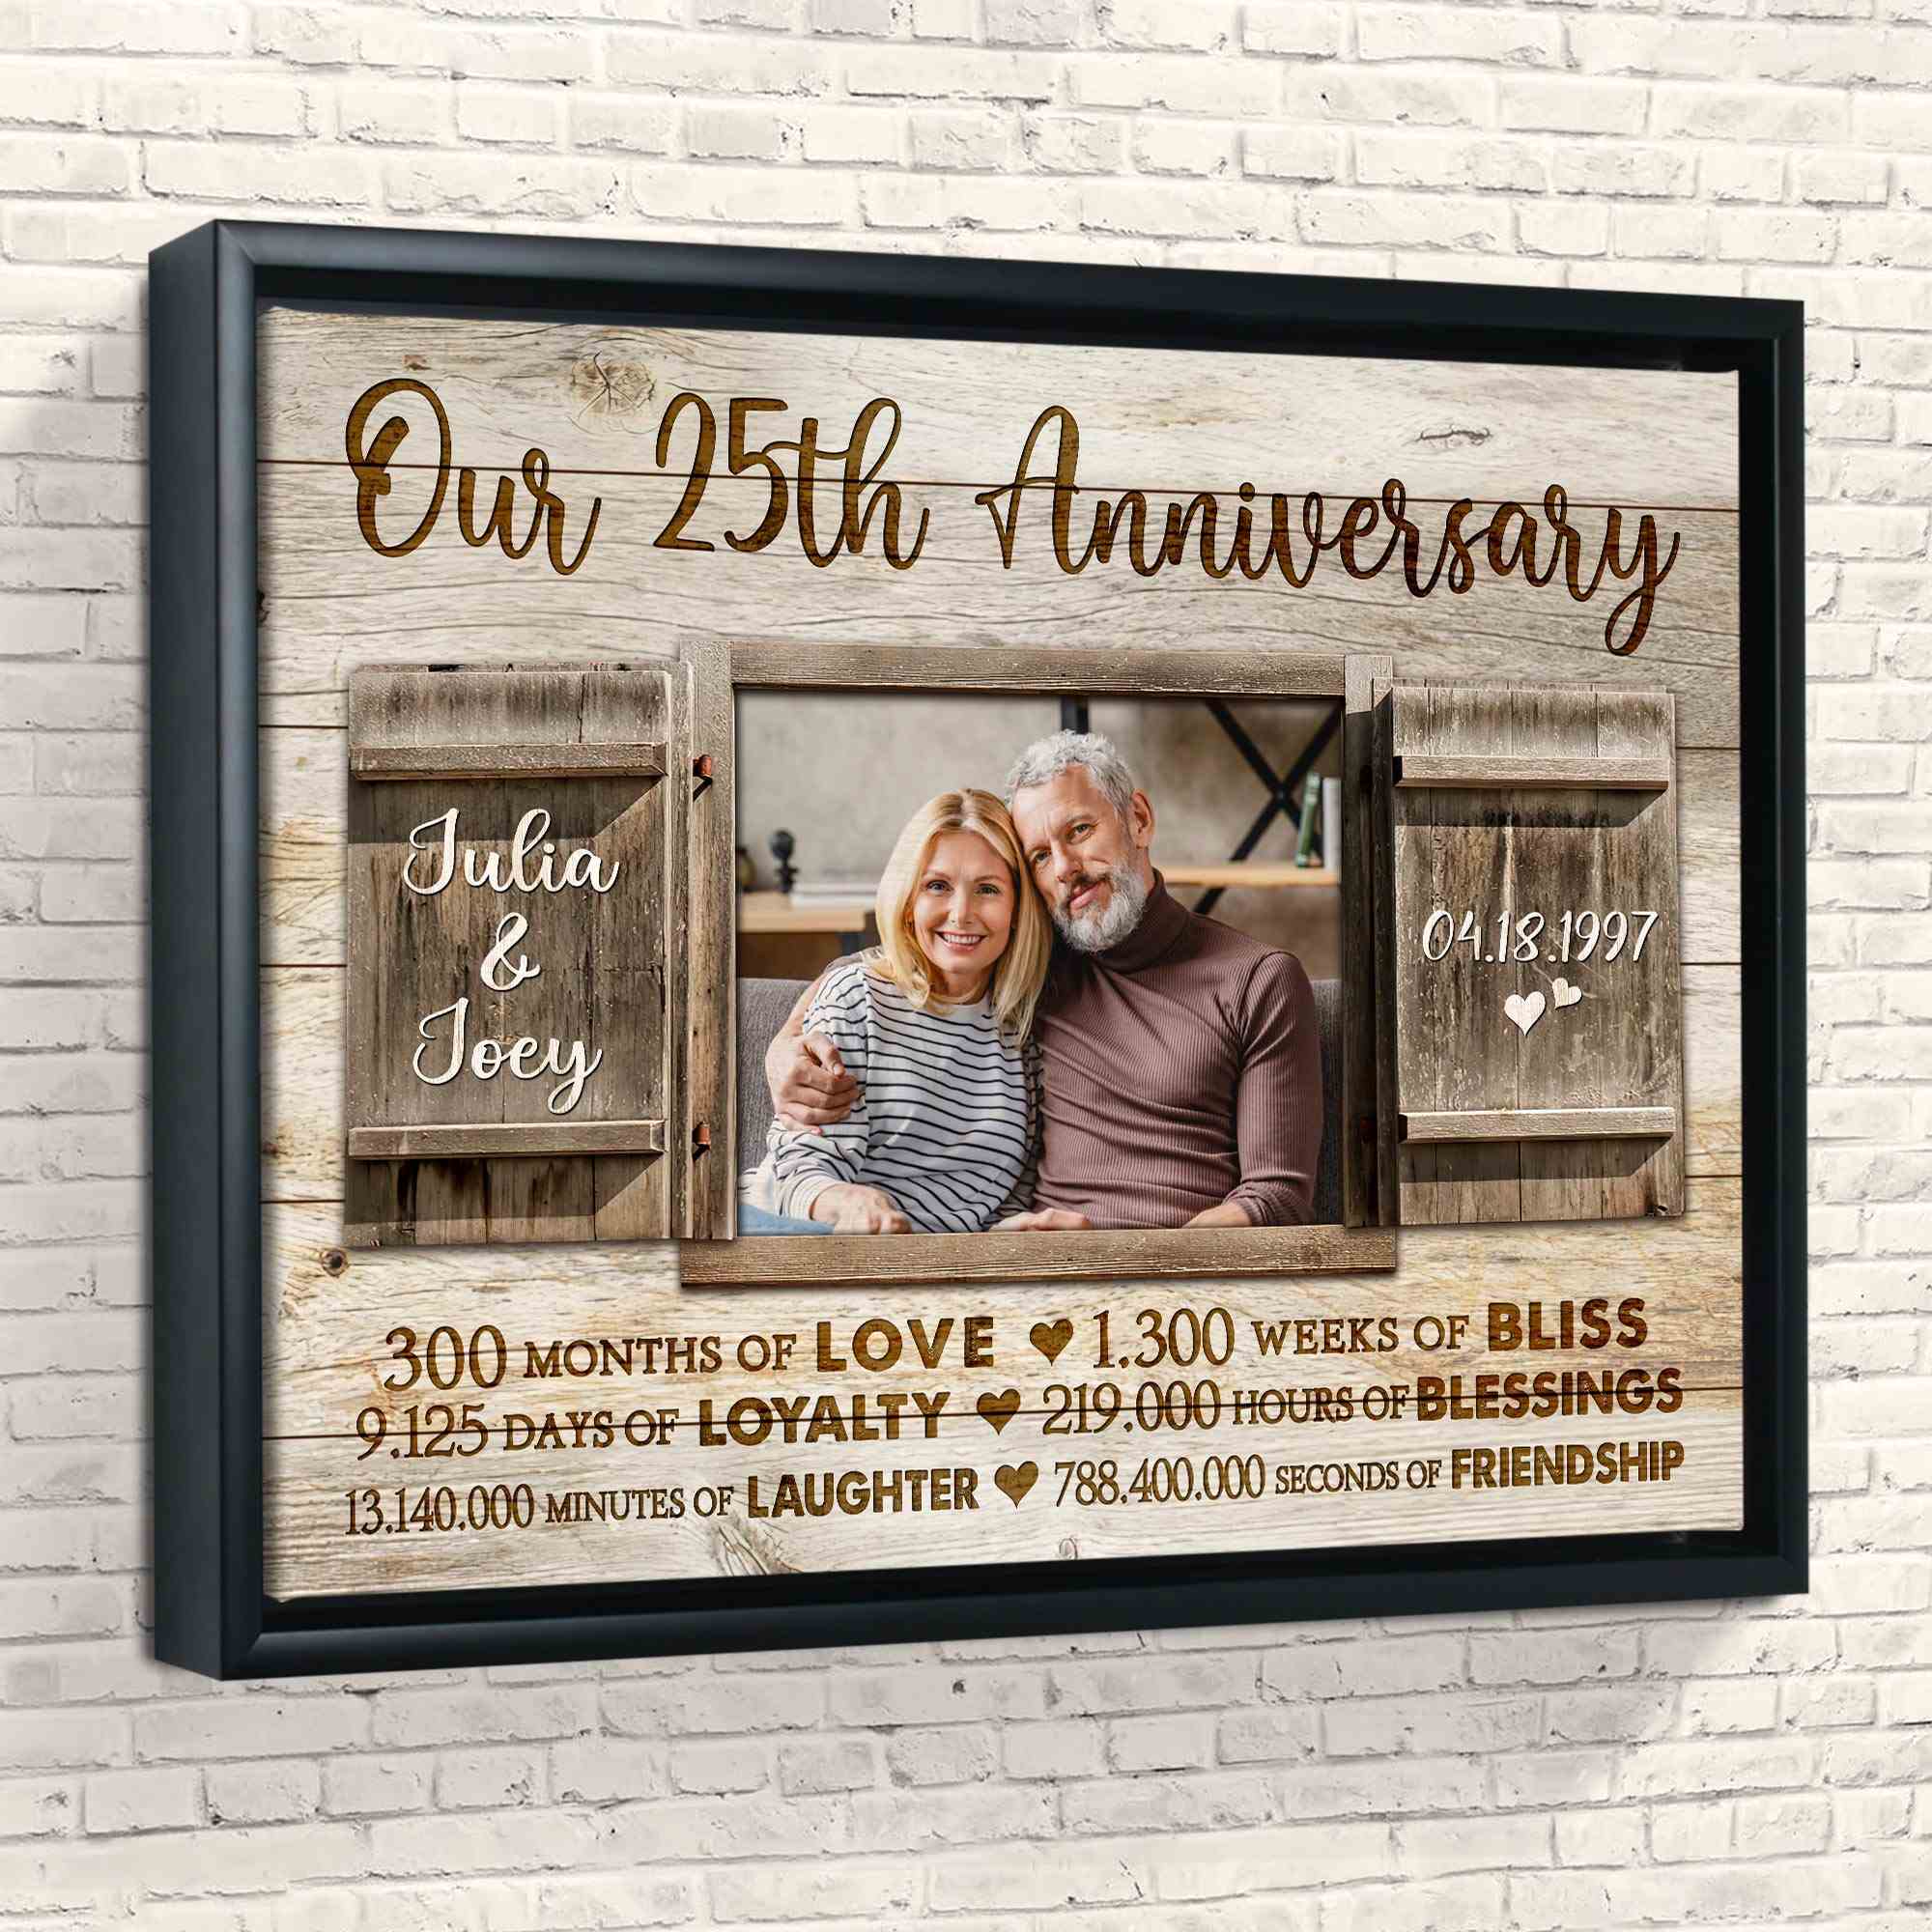 Personalized Picture Frames 25th 25 Year Wedding Anniversary Gifts